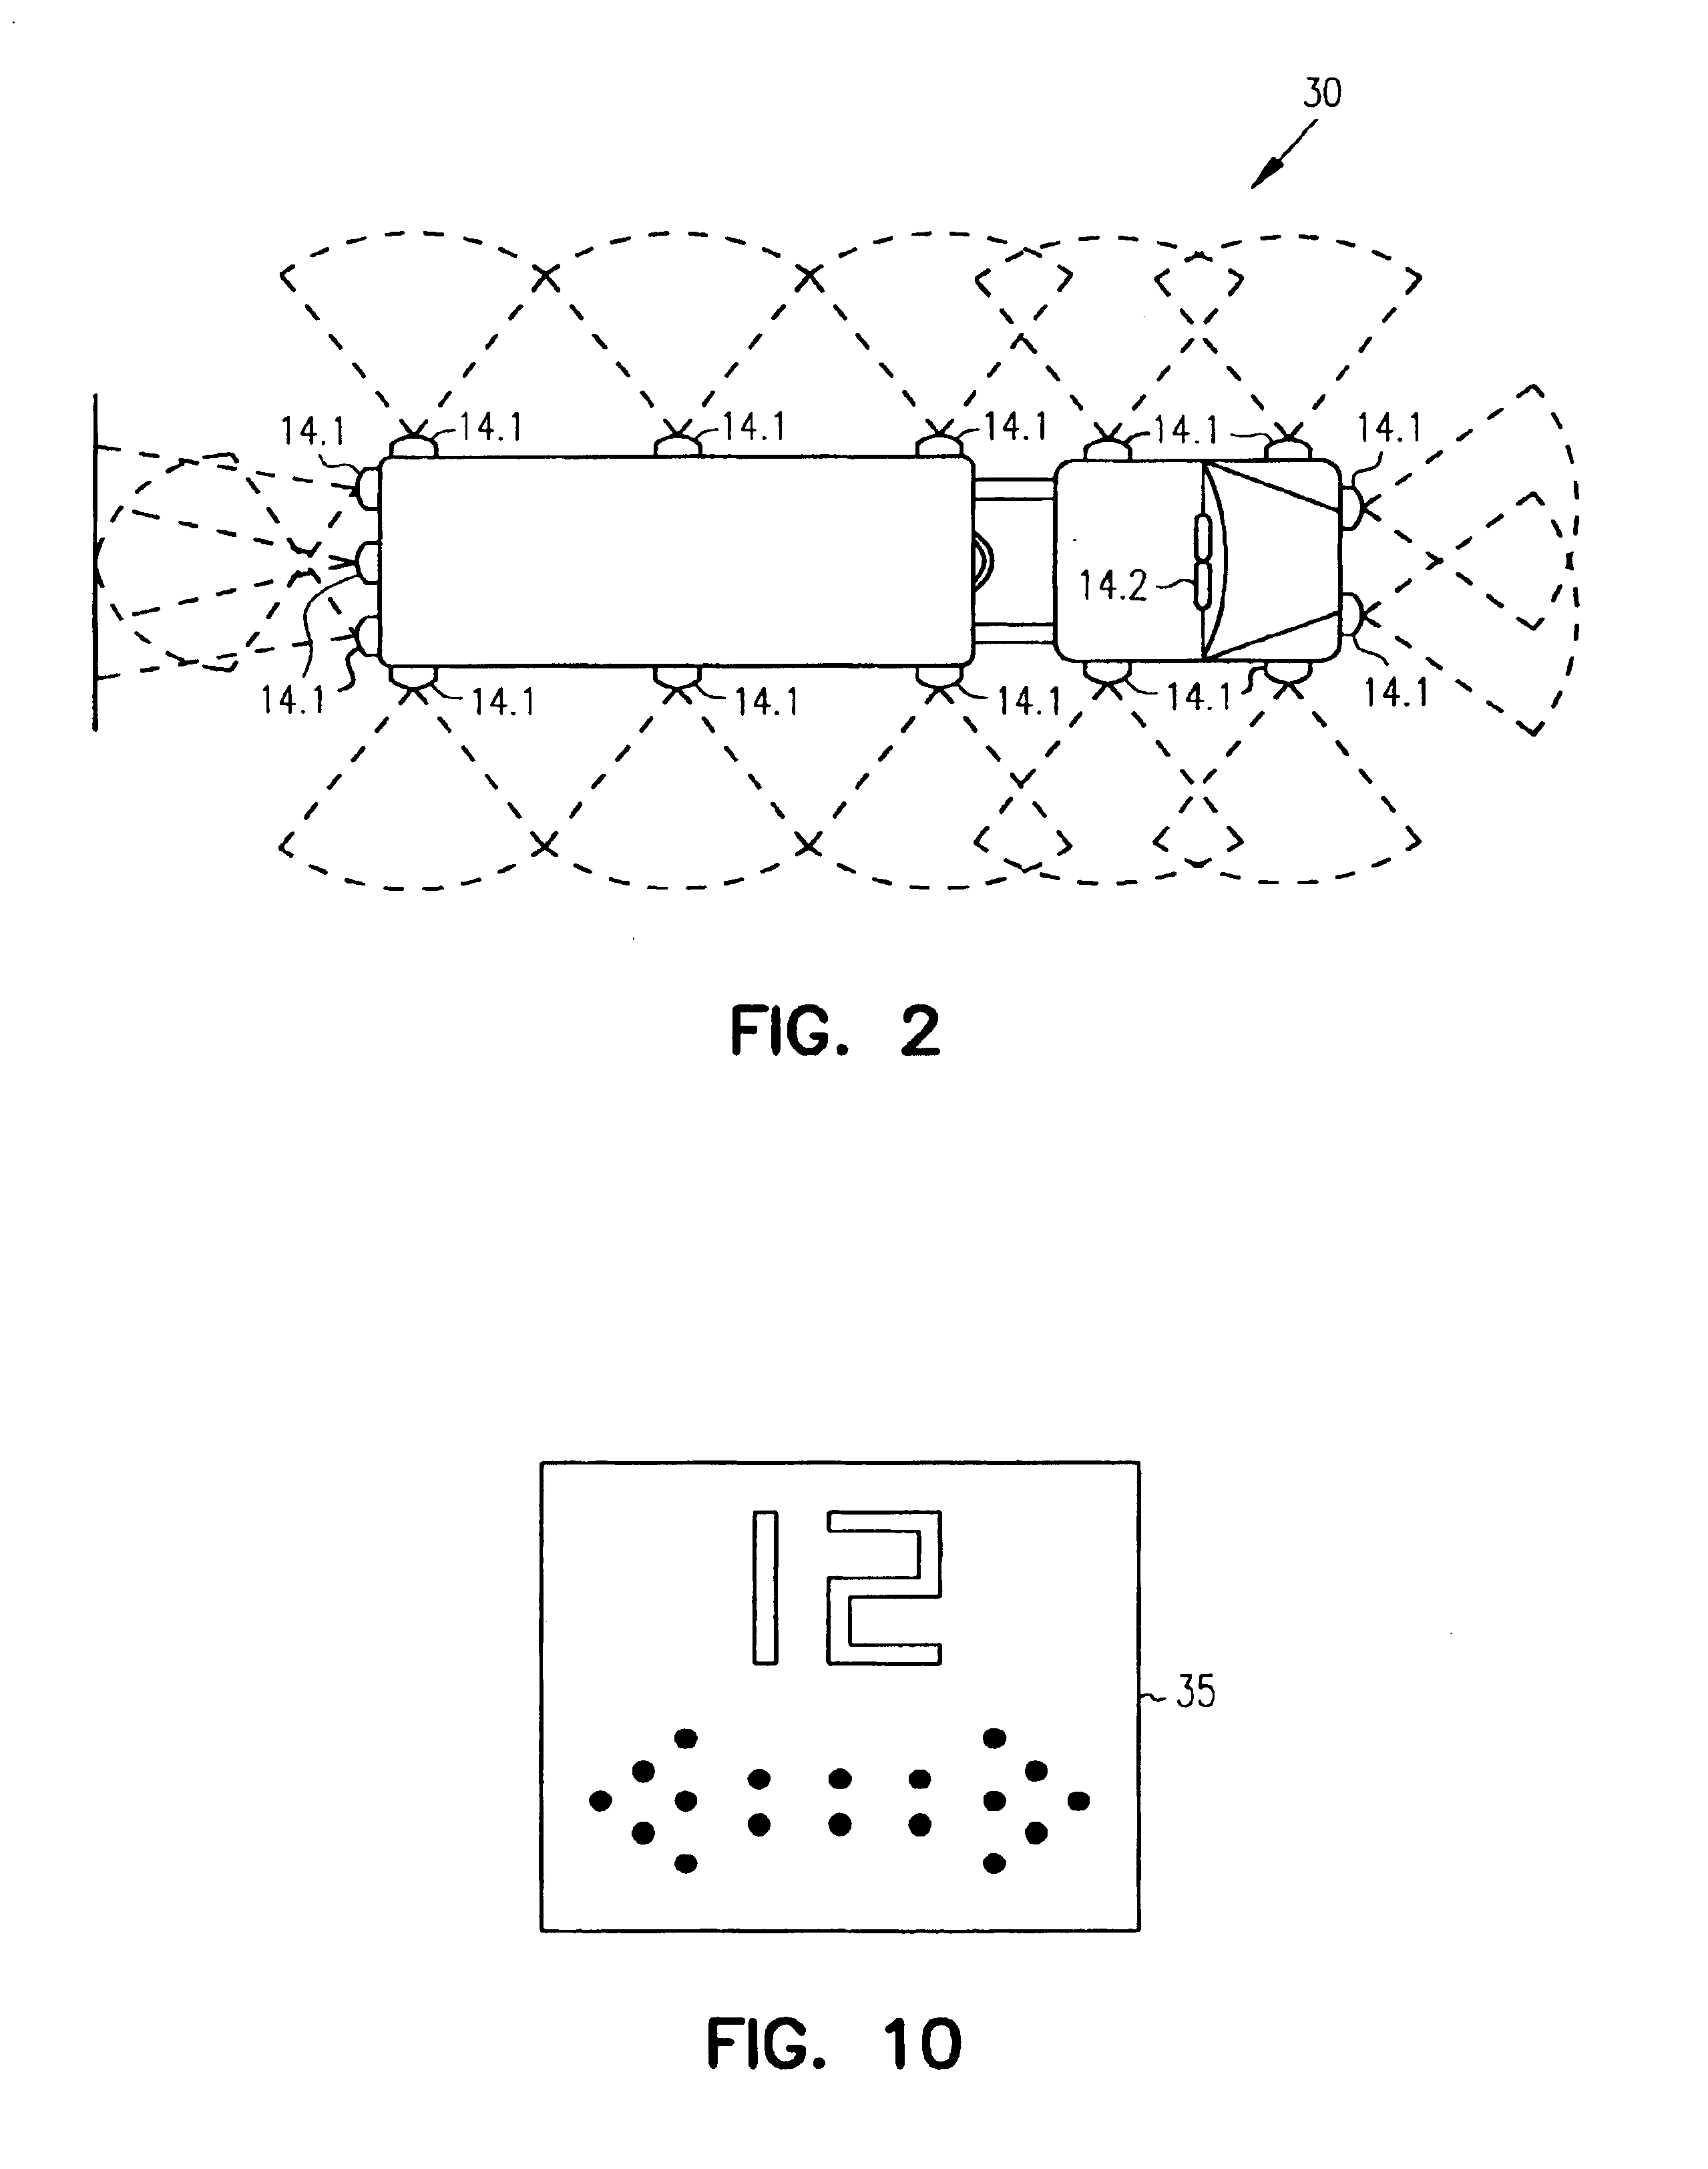 System and method for warning of potential collisions